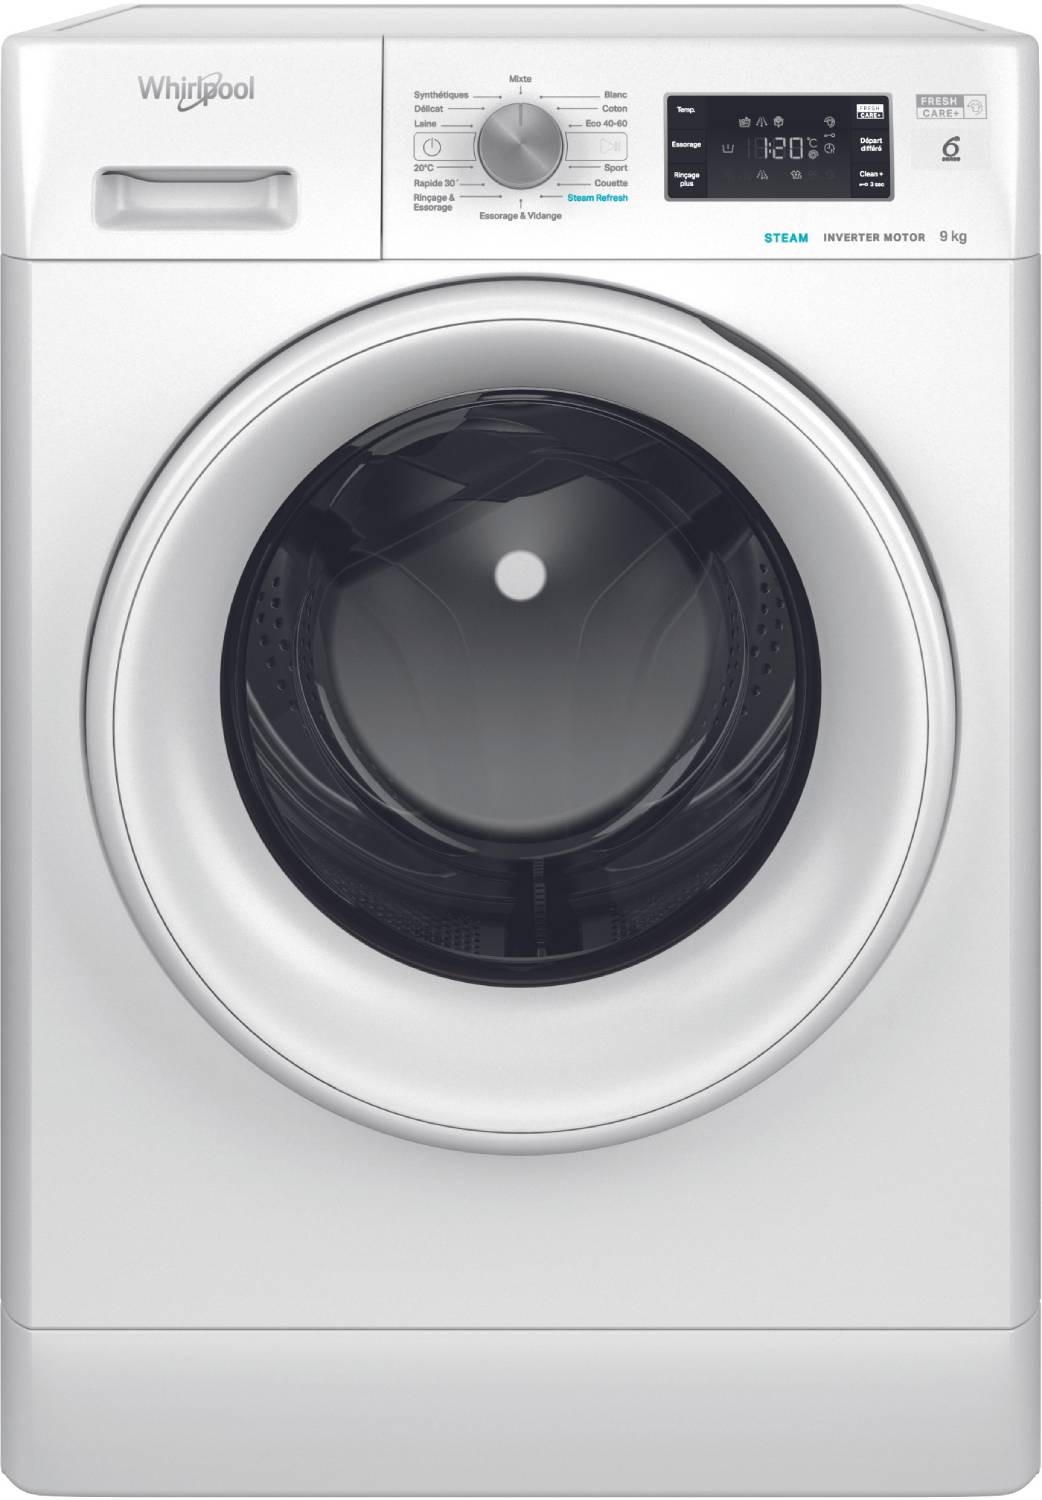 WHIRLPOOL Lave linge Frontal